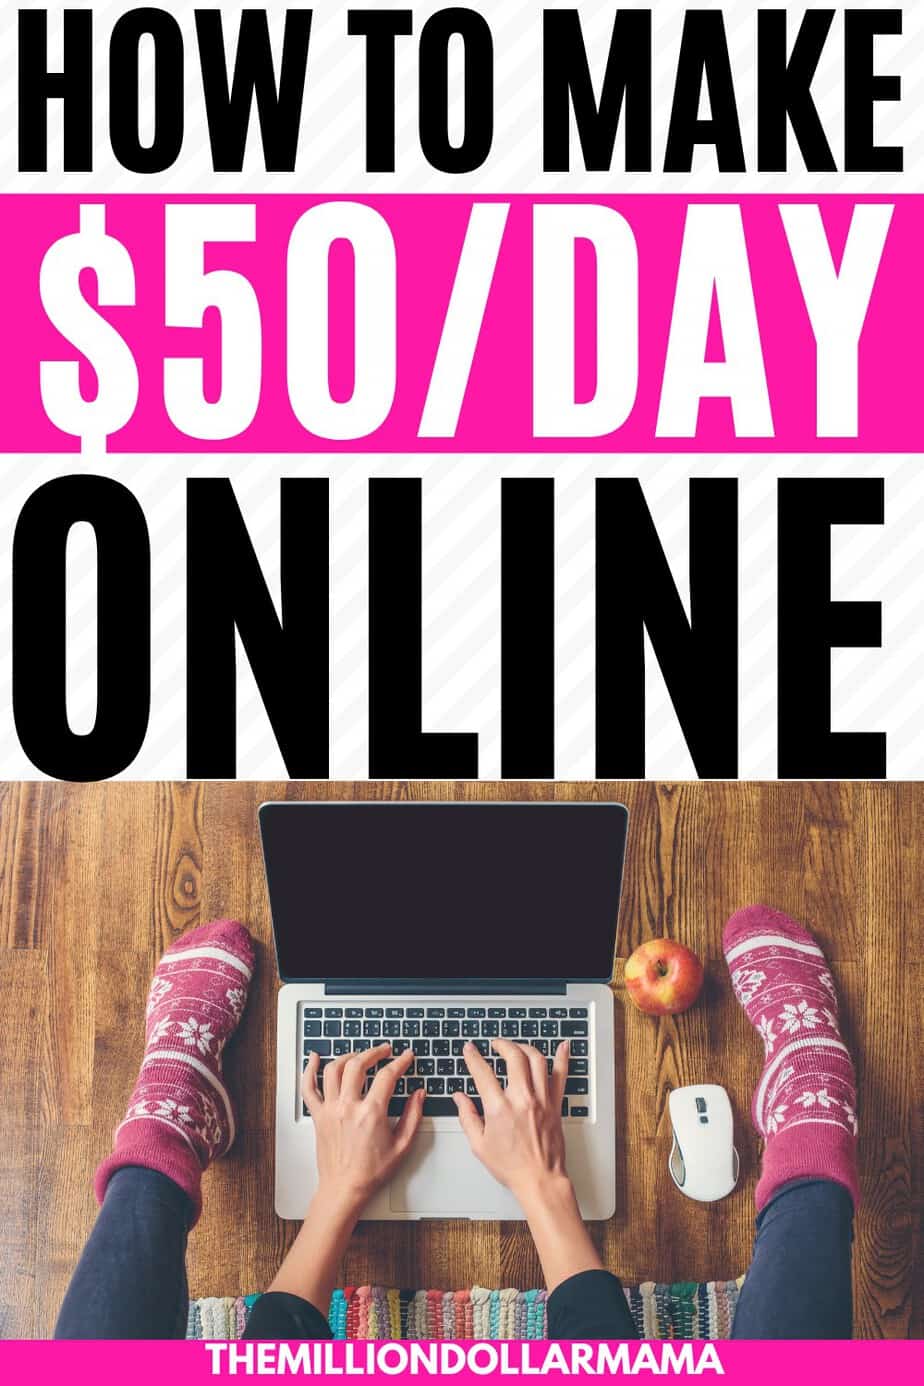 Want to know how to make money online? It's actually not as hard as a lot of people think. Click through to learn easy ways to make money online. $50 a day or even more is possible!